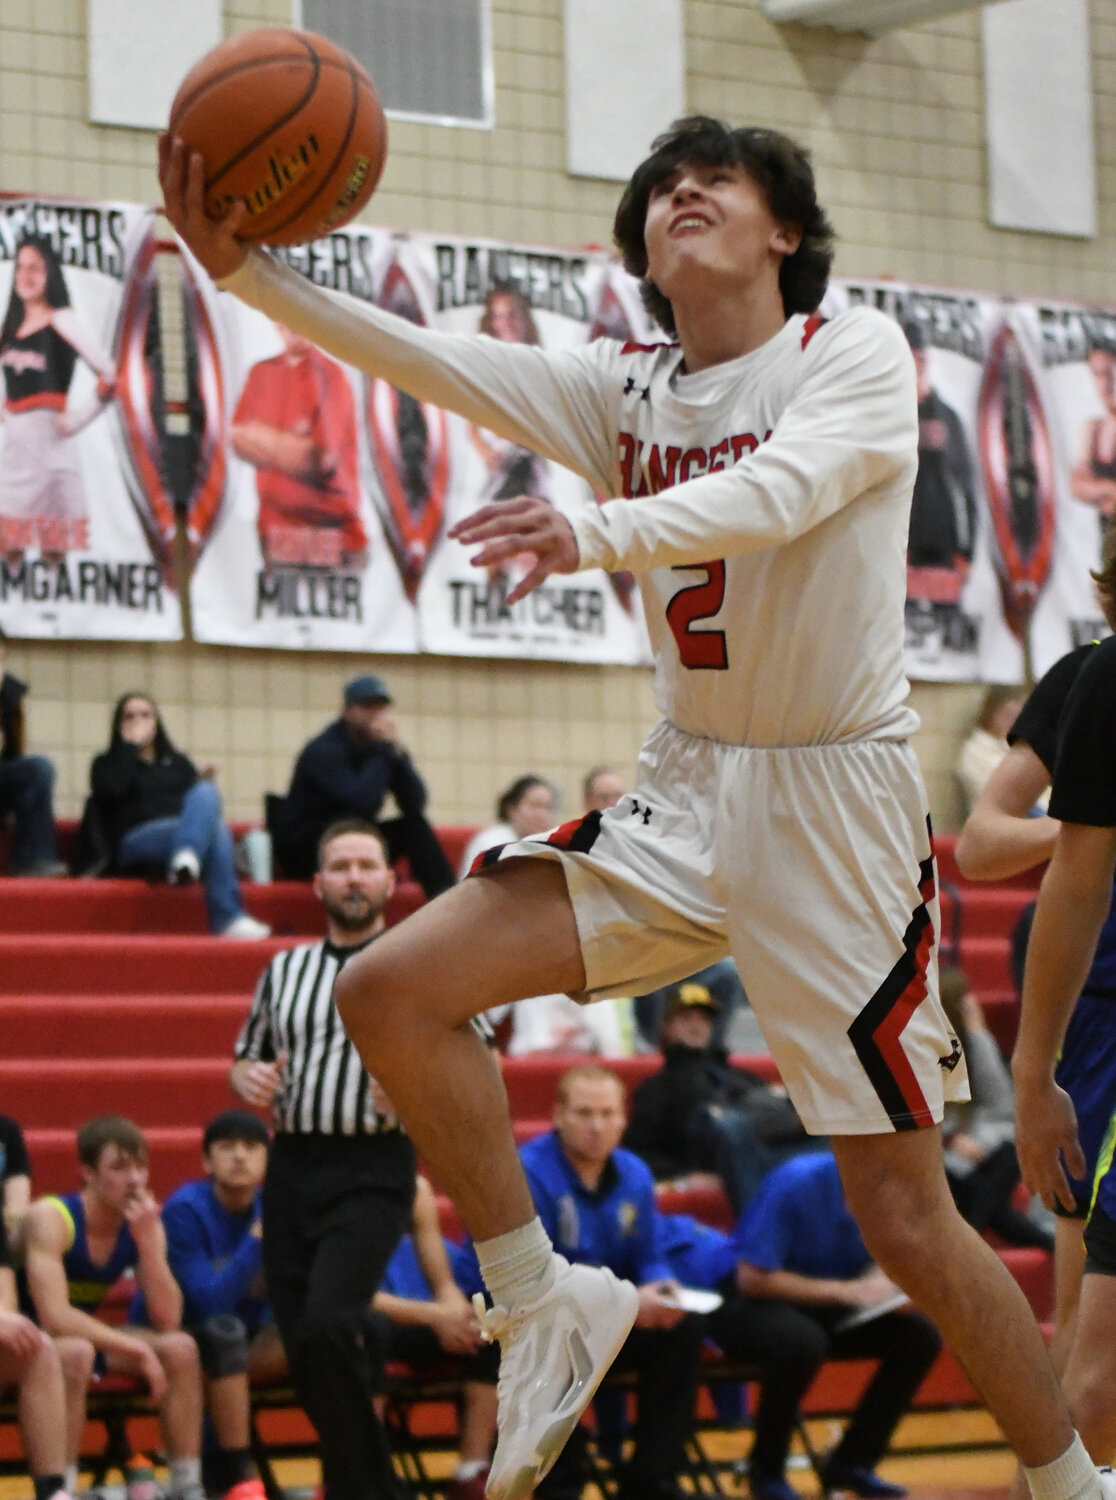 Ranger junior Ethyn Perkins was named to the 2A Southwest All-Conference Team for the first time this season, averaging 9.1 points and 2.6 rebounds per game. Perkins led the team in assists, with 2.3 per game, and was second on the team in total points, with 237.